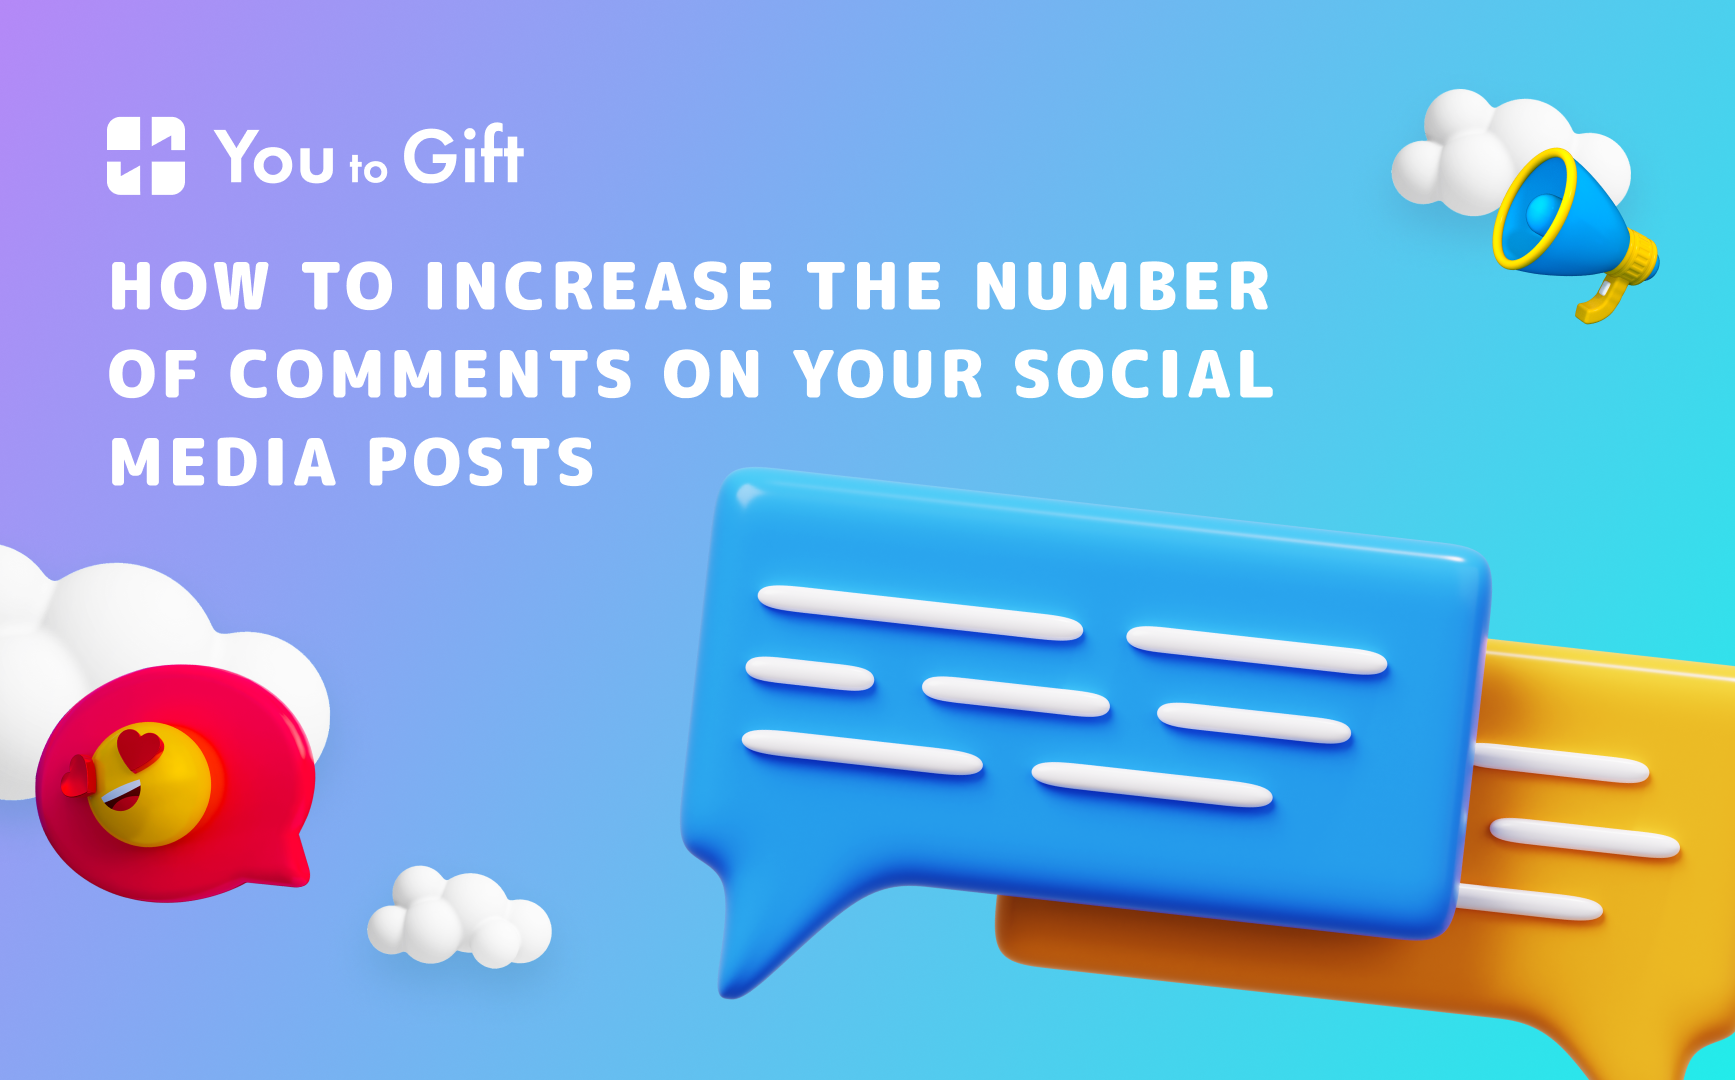 How to Increase the Number of Comments on Your Social Media Posts